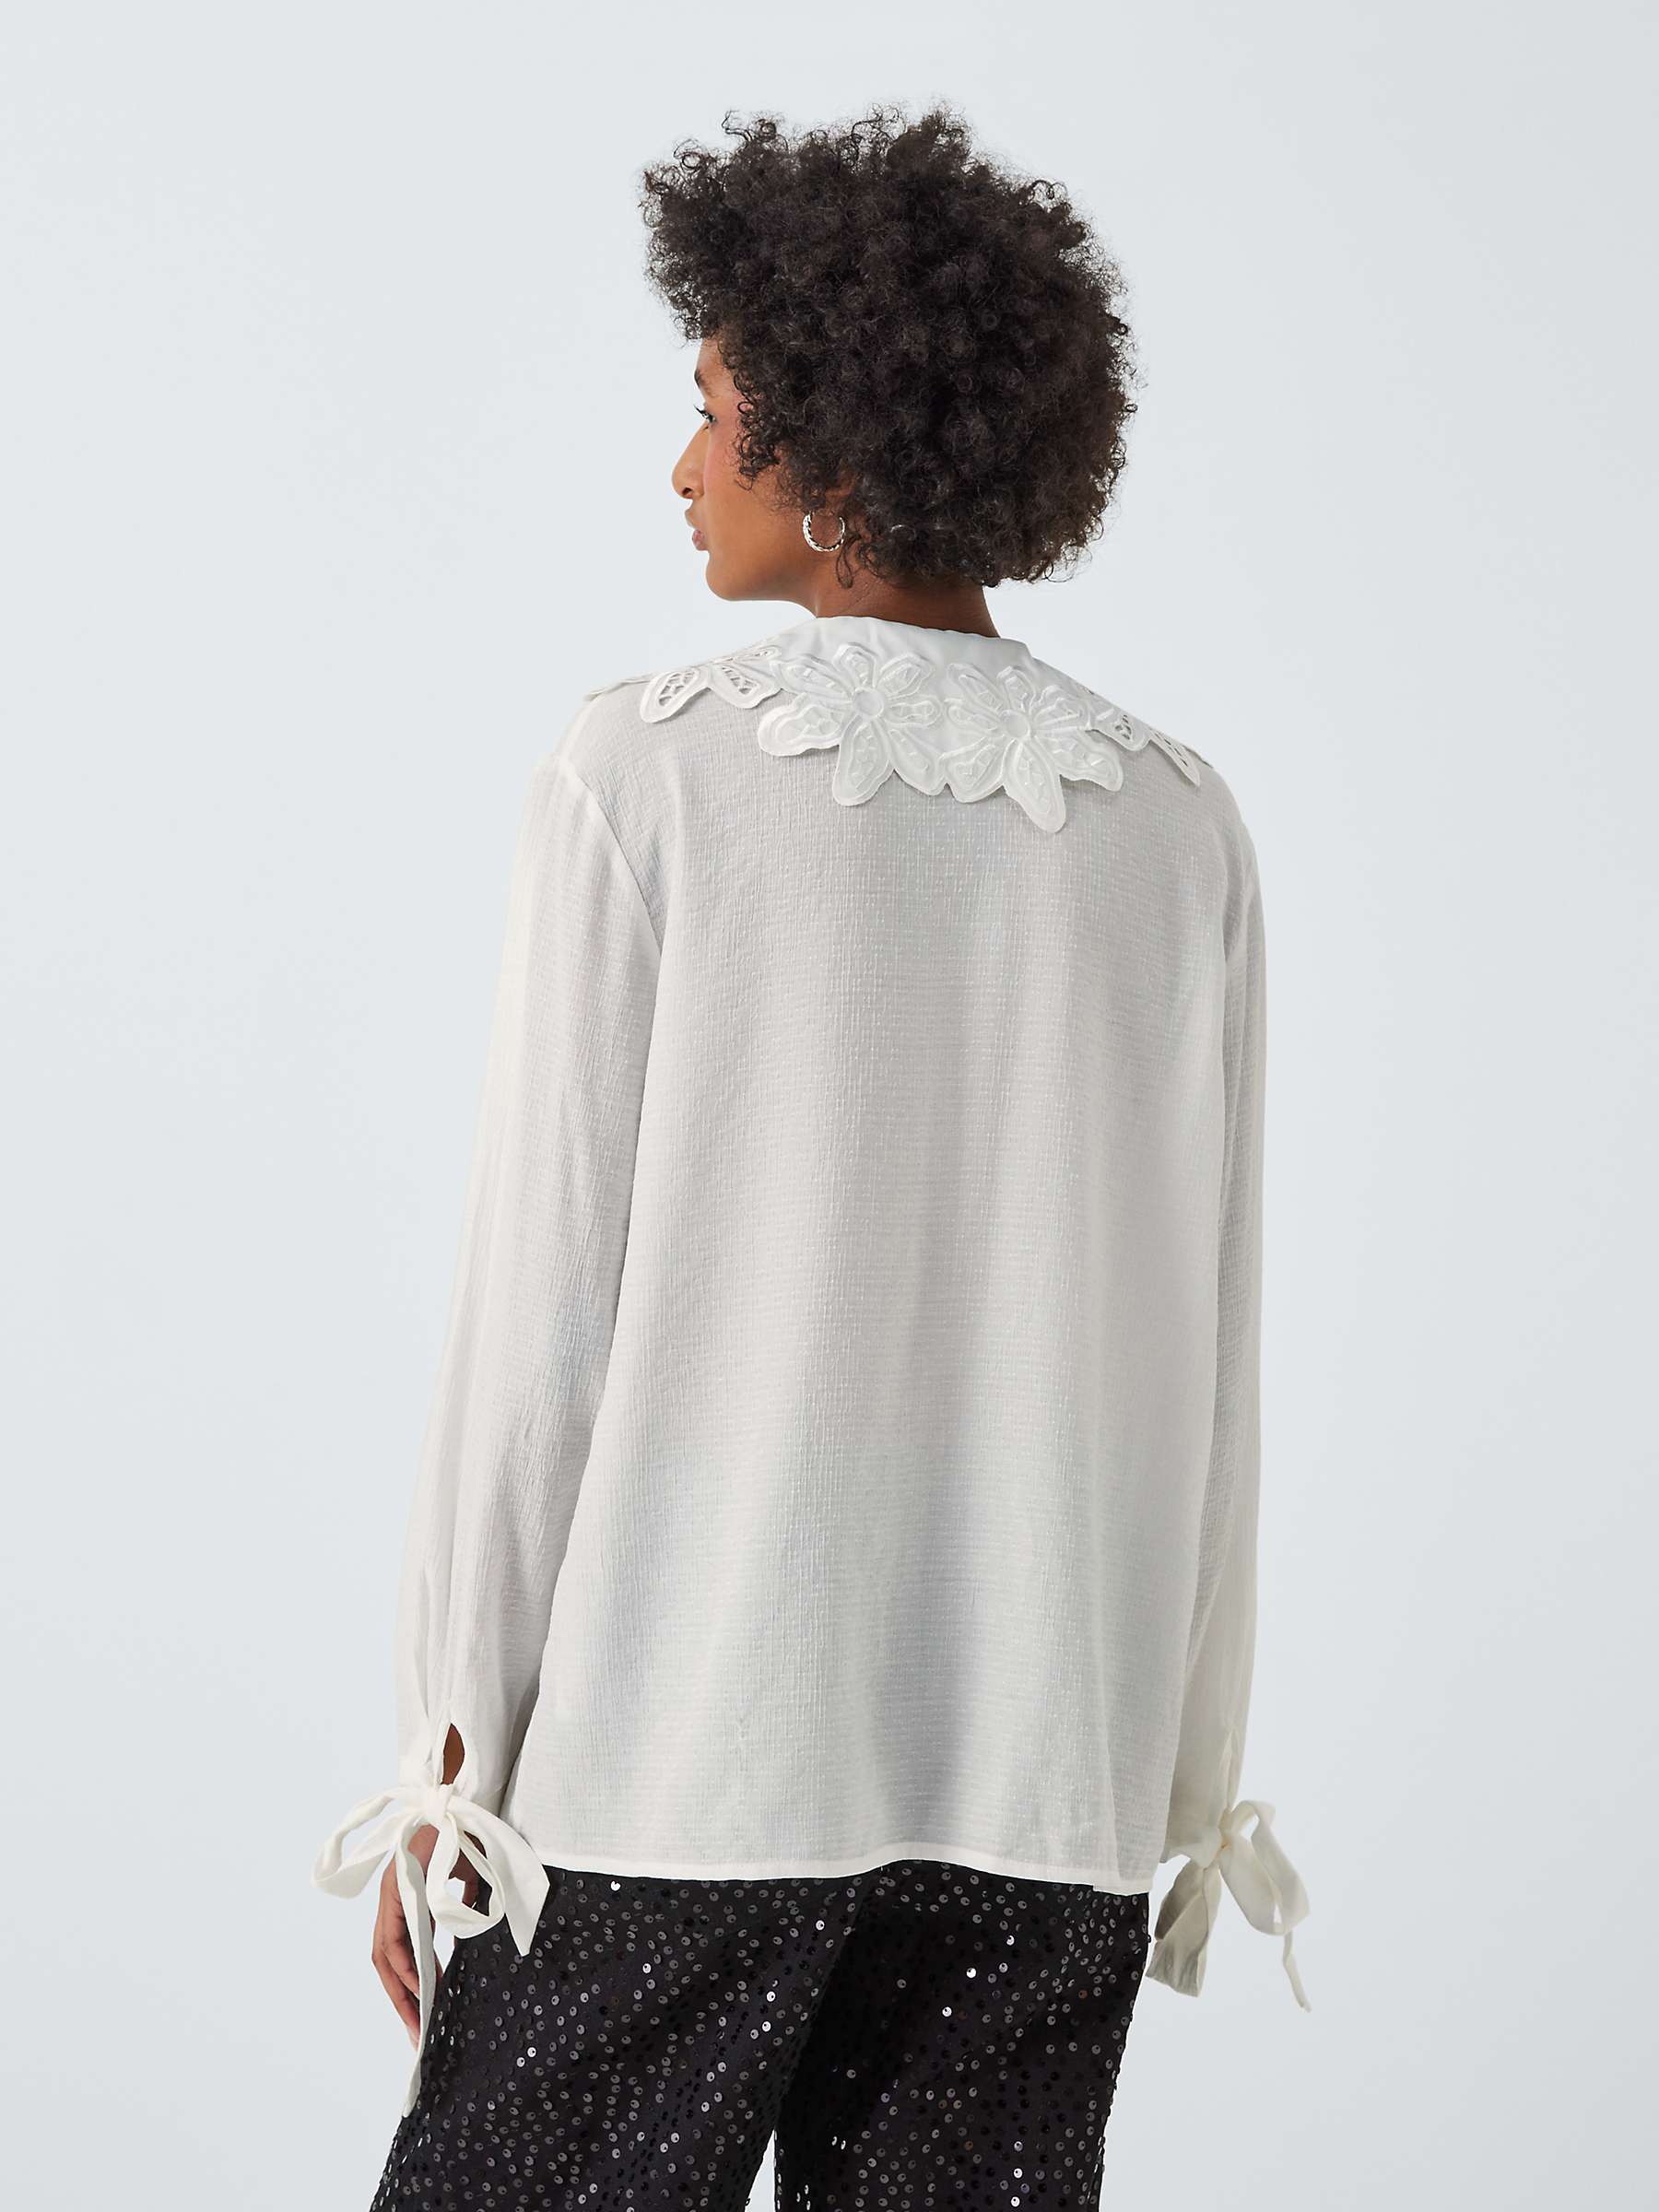 Buy Sister Jane Victoria Textured Floral Cut-Out Collar Shirt, White Online at johnlewis.com